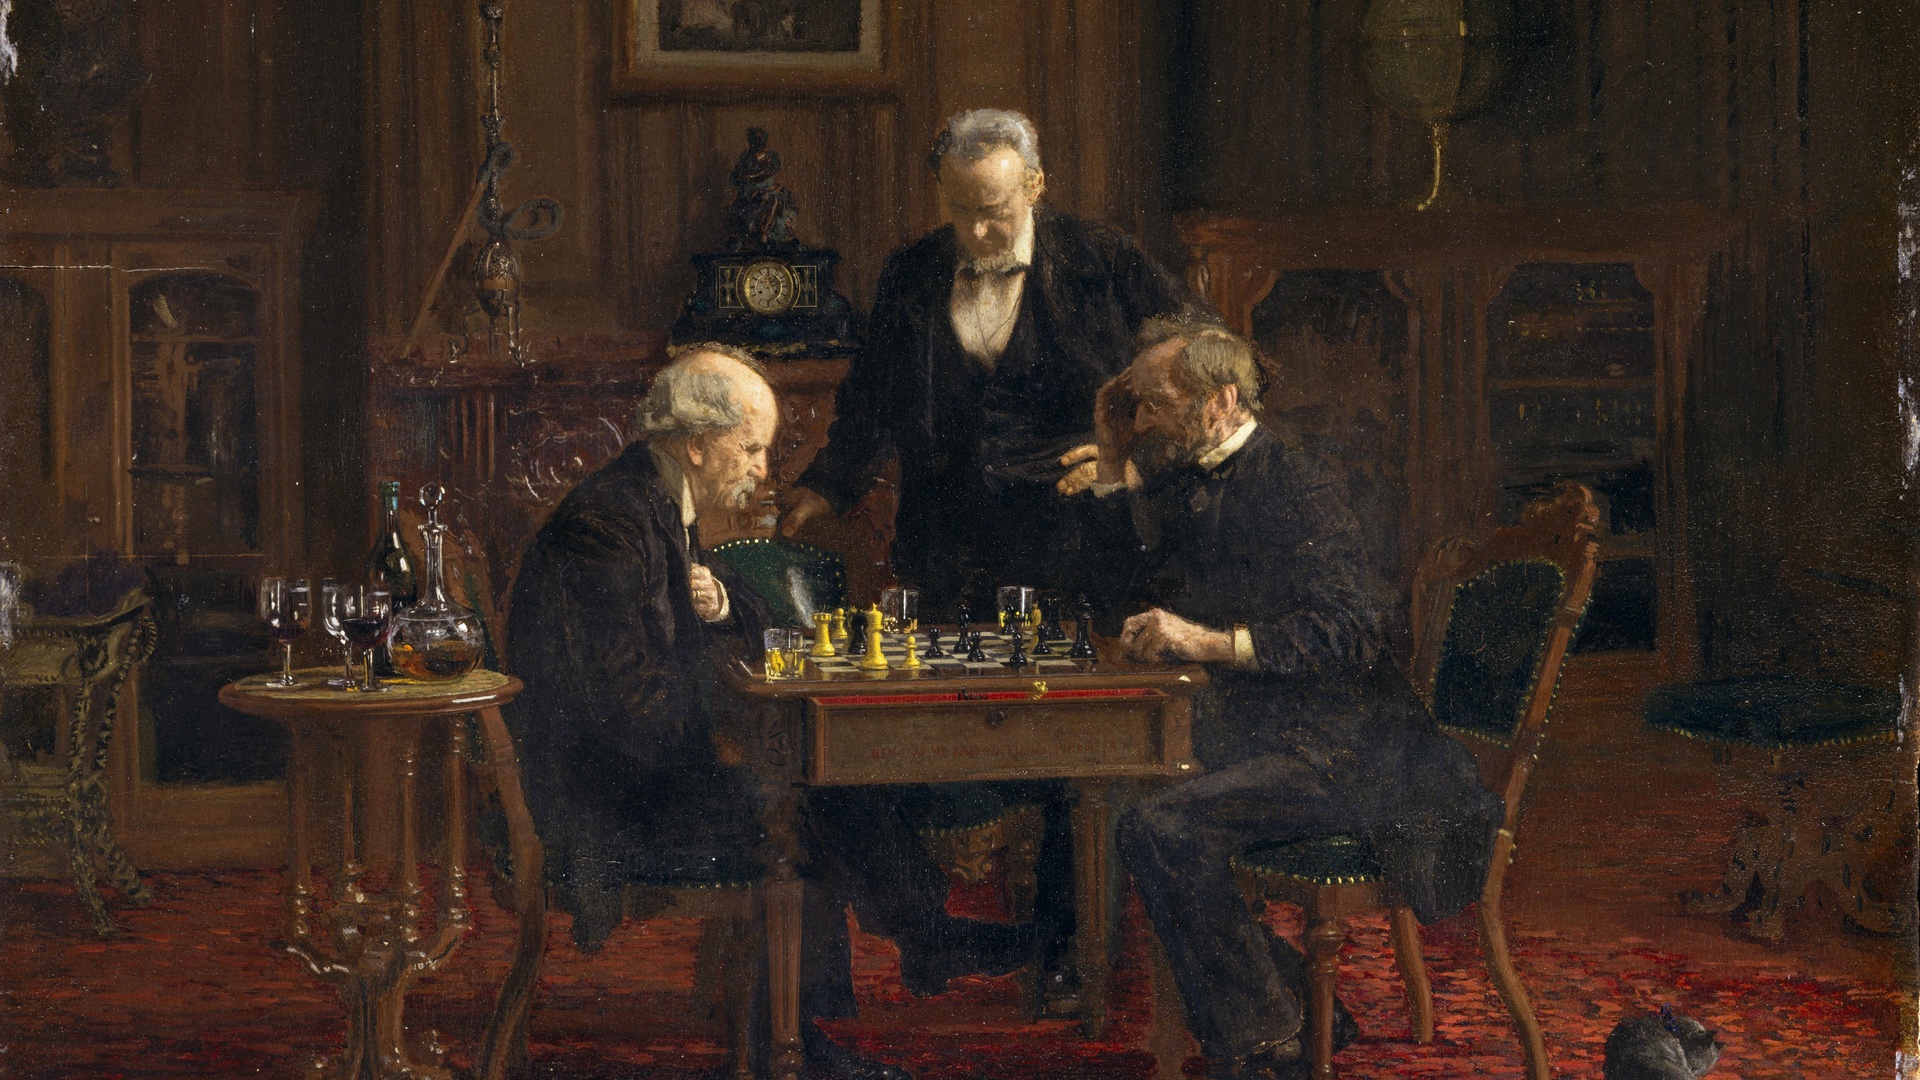 Will a perfect chess game ever be played? - Quora